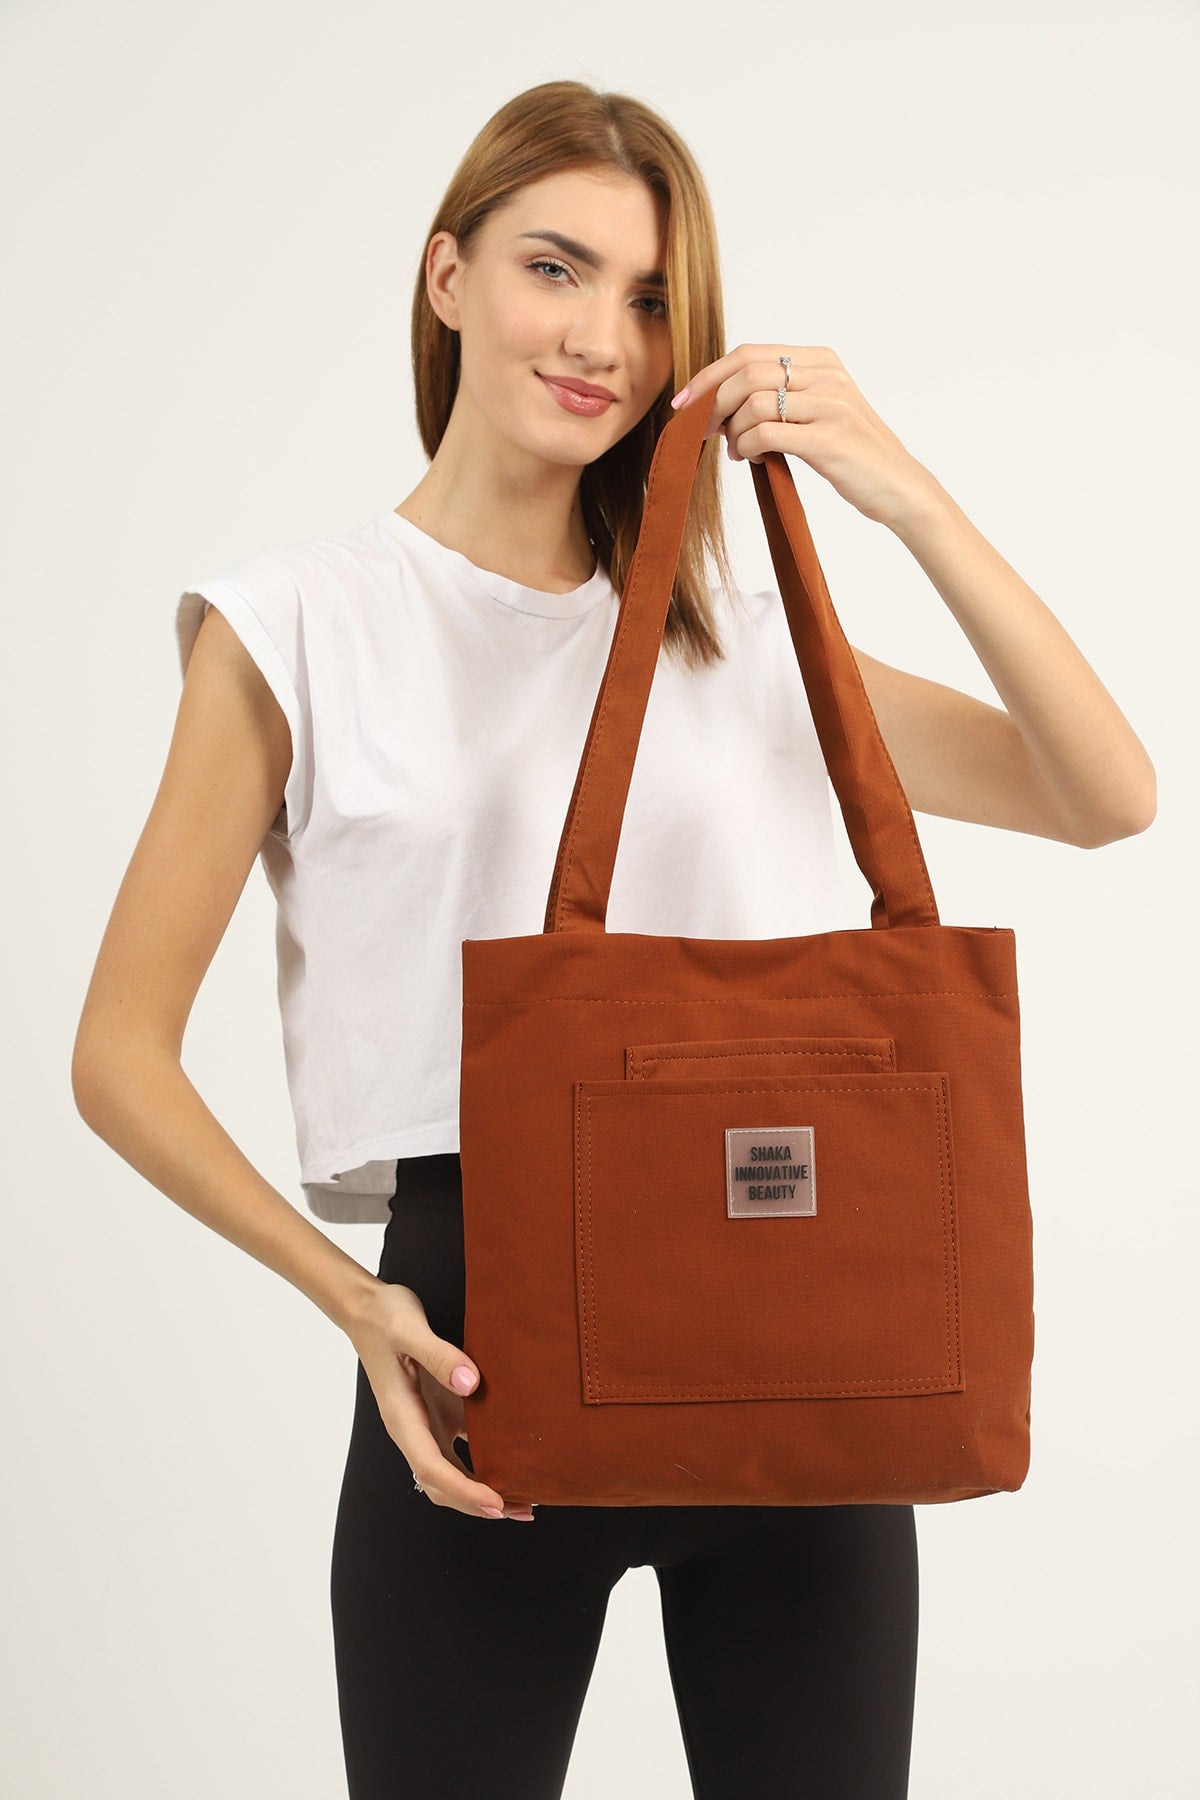 Tile U22 3-Compartment Front 2 Pocket Detailed Canvas Fabric Daily Women's Arm and Shoulder Bag B:35 E:35